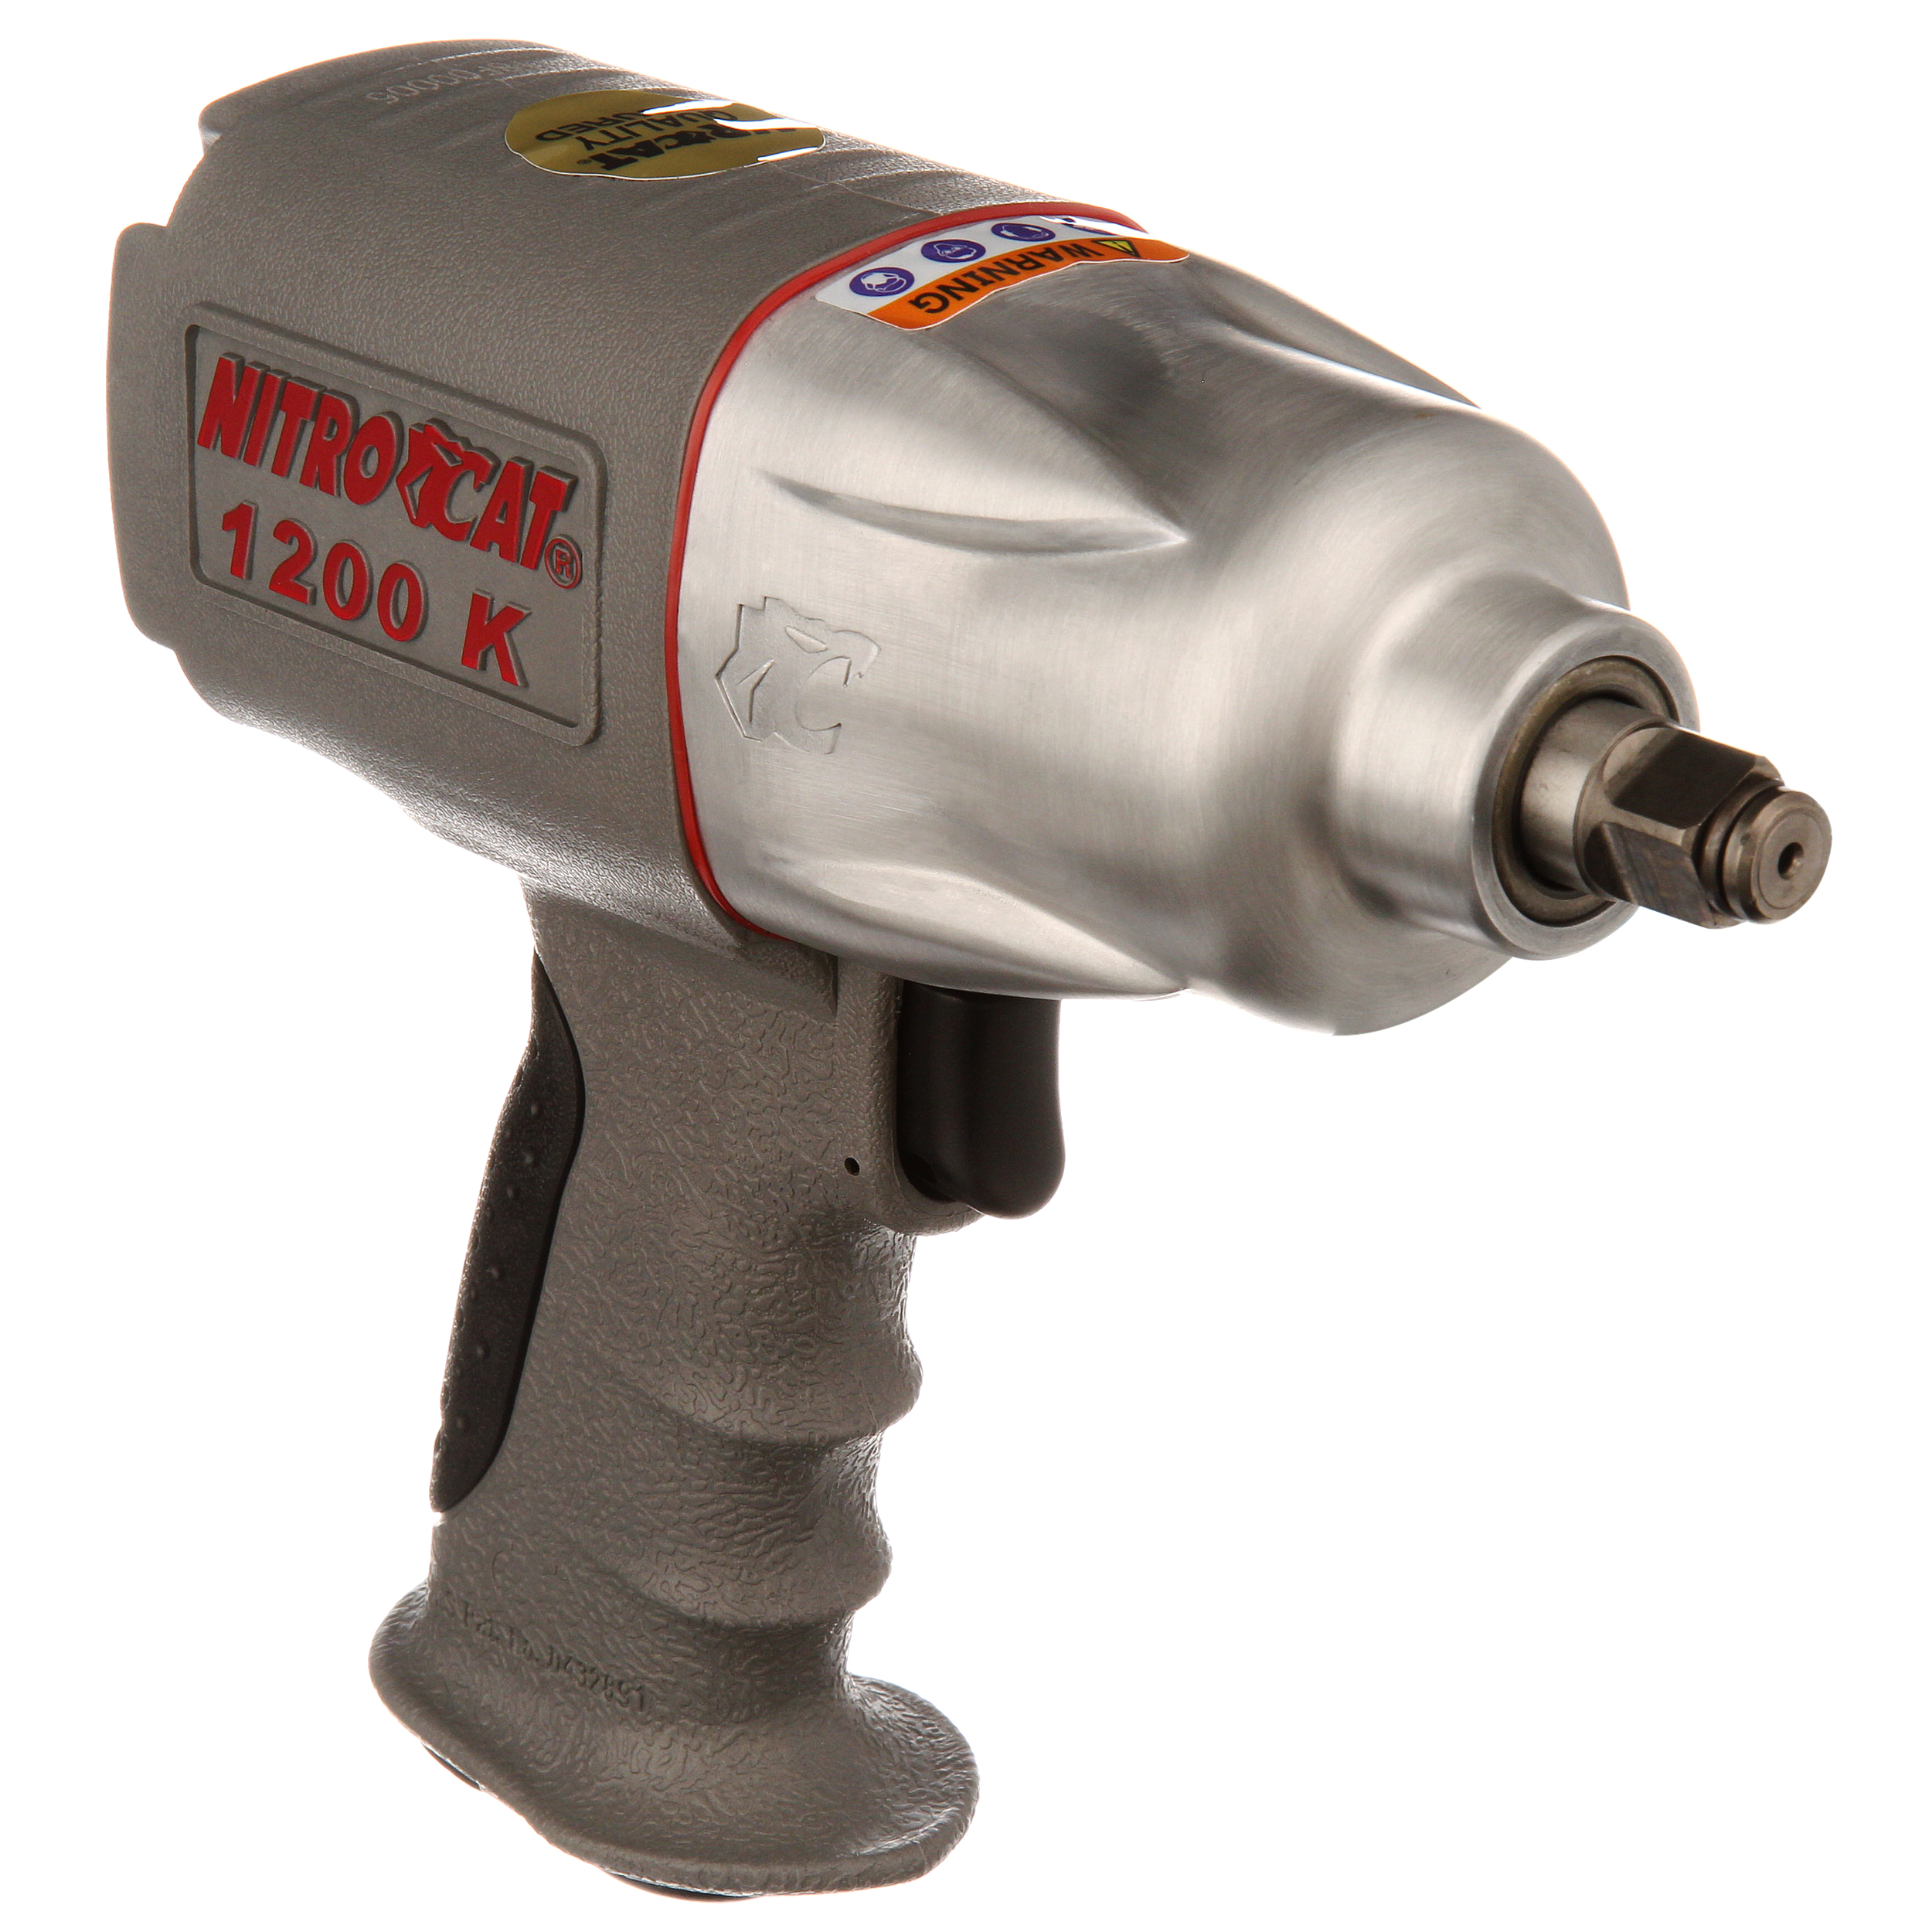 AIRCAT Pneumatic Tools 1200-K 1/2-Inch Nitrocat Composite Twin Clutch Impact Wrench 1295 ft-lbs - image 3 of 6